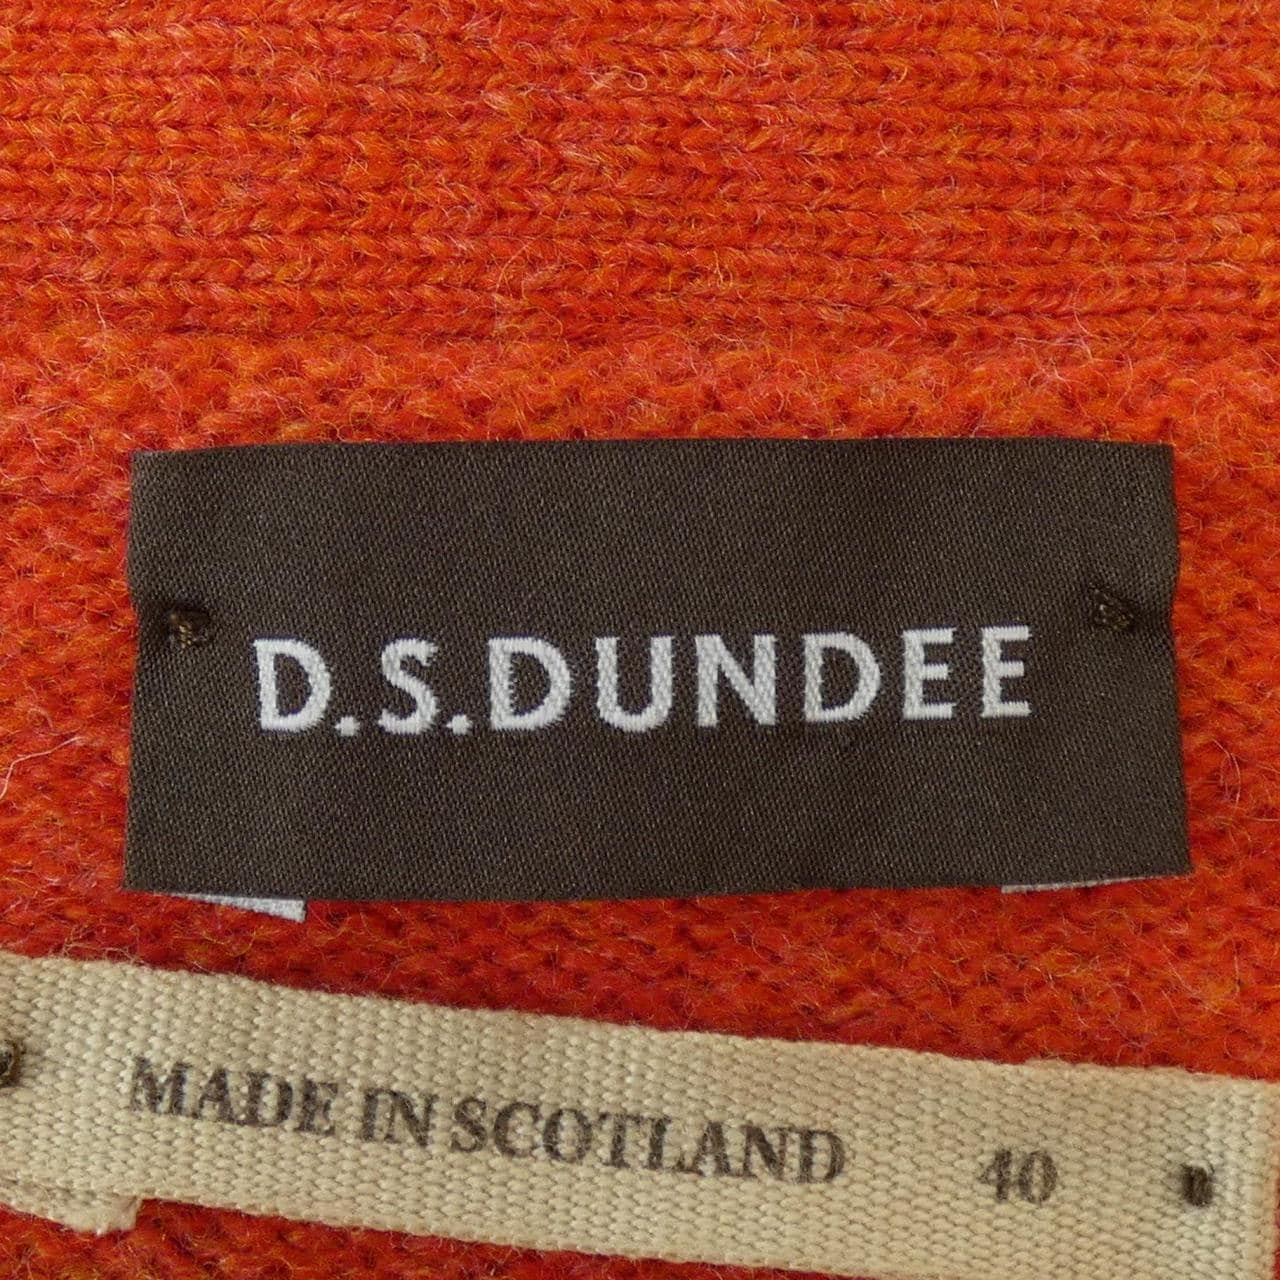 D.S.DUNDEE开襟衫